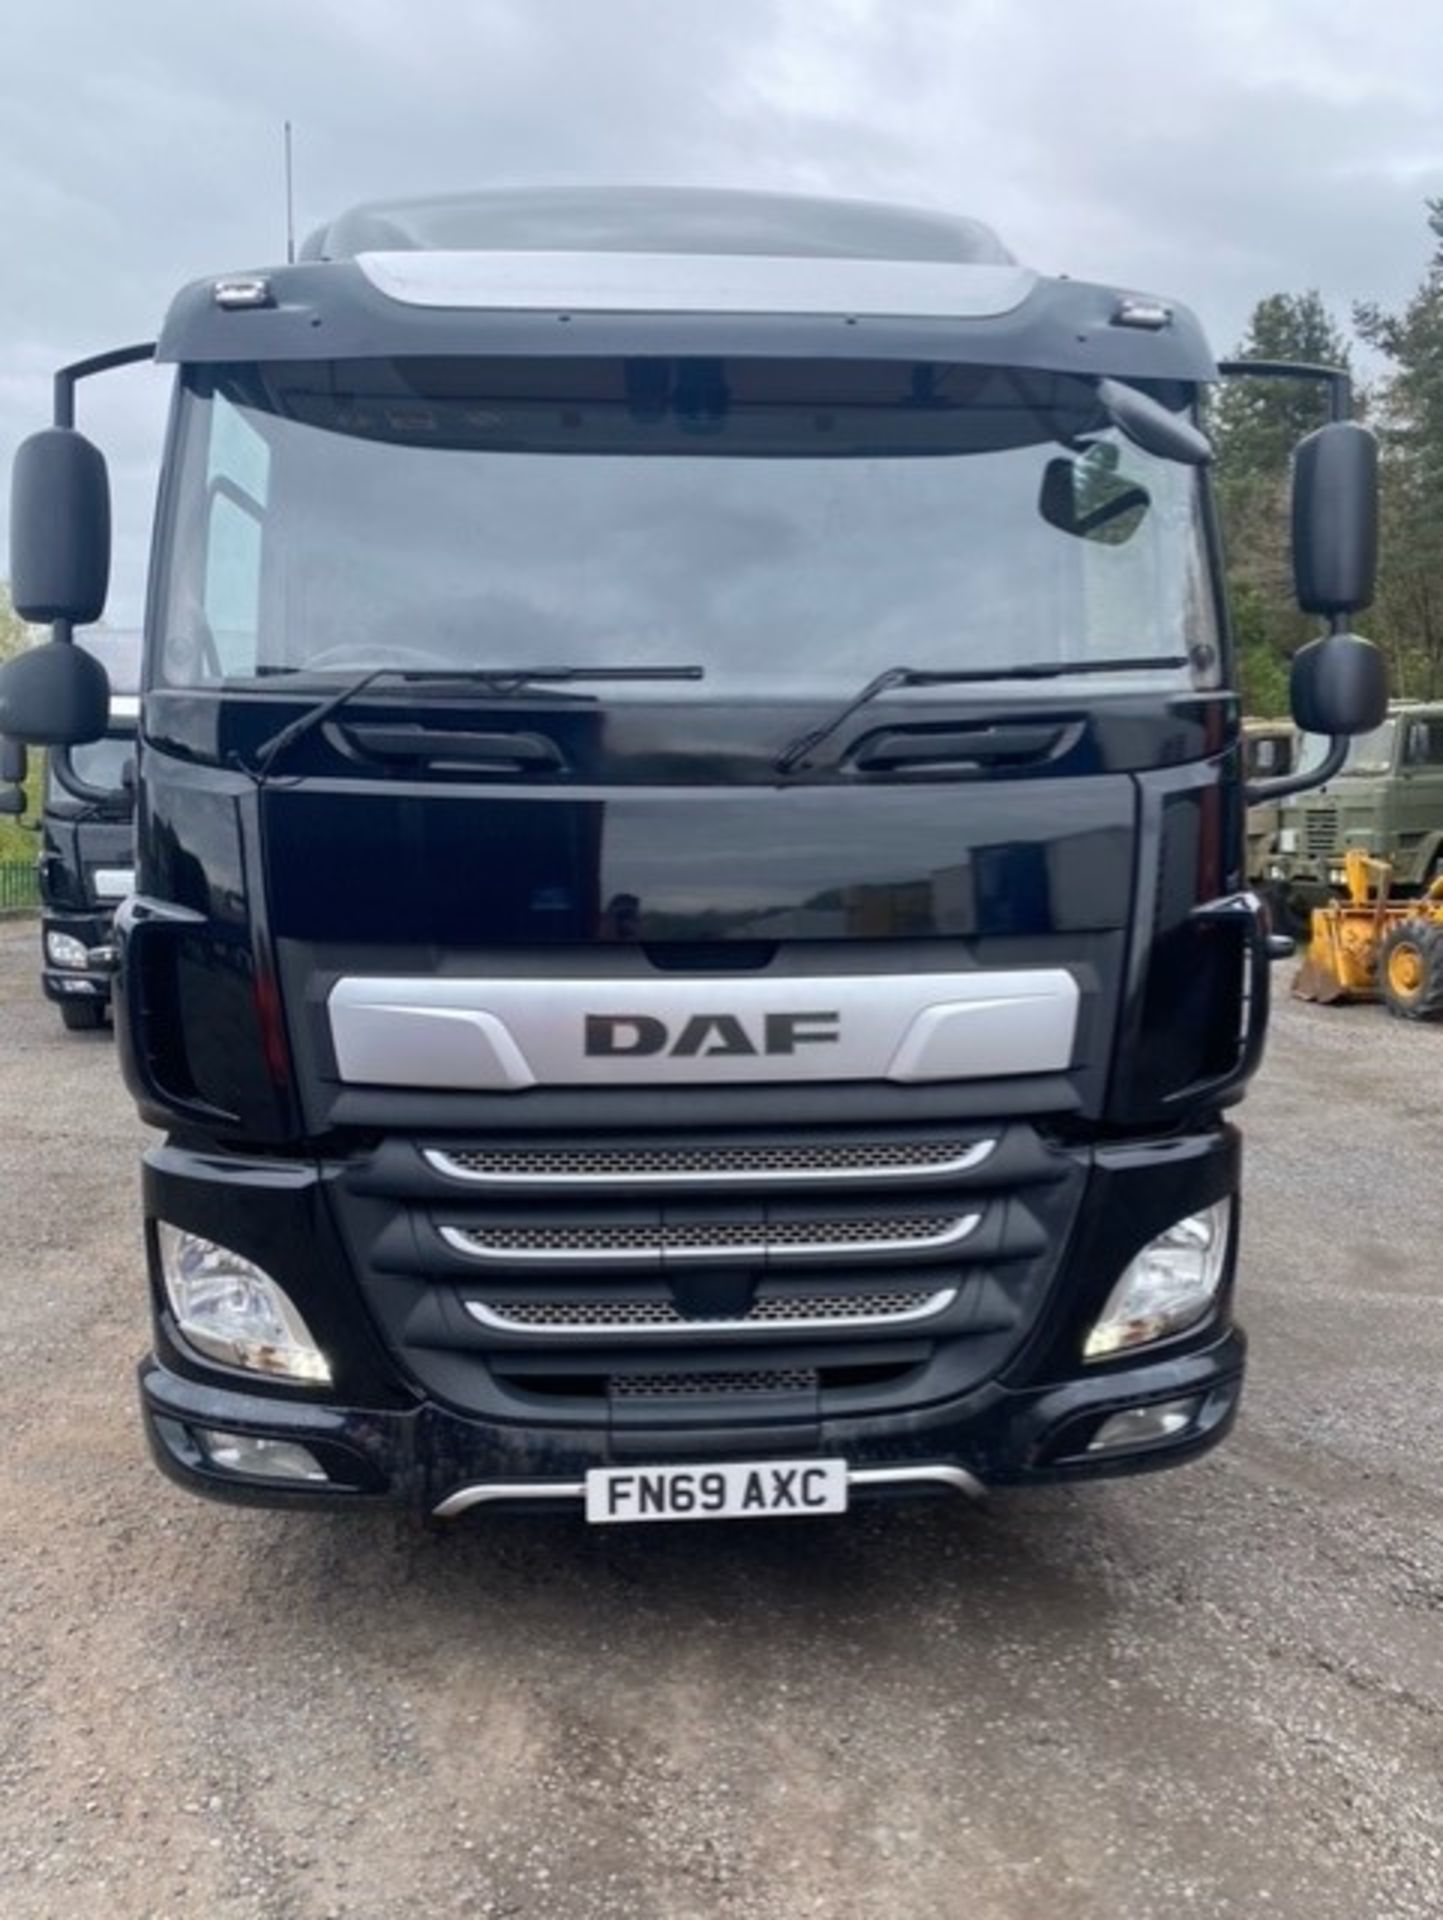 2019, DAF CF 260 FA (Ex-Fleet Owned & Maintained) - FN69 AXC (18 Ton Rigid Truck with Tail Lift) - Image 16 of 17